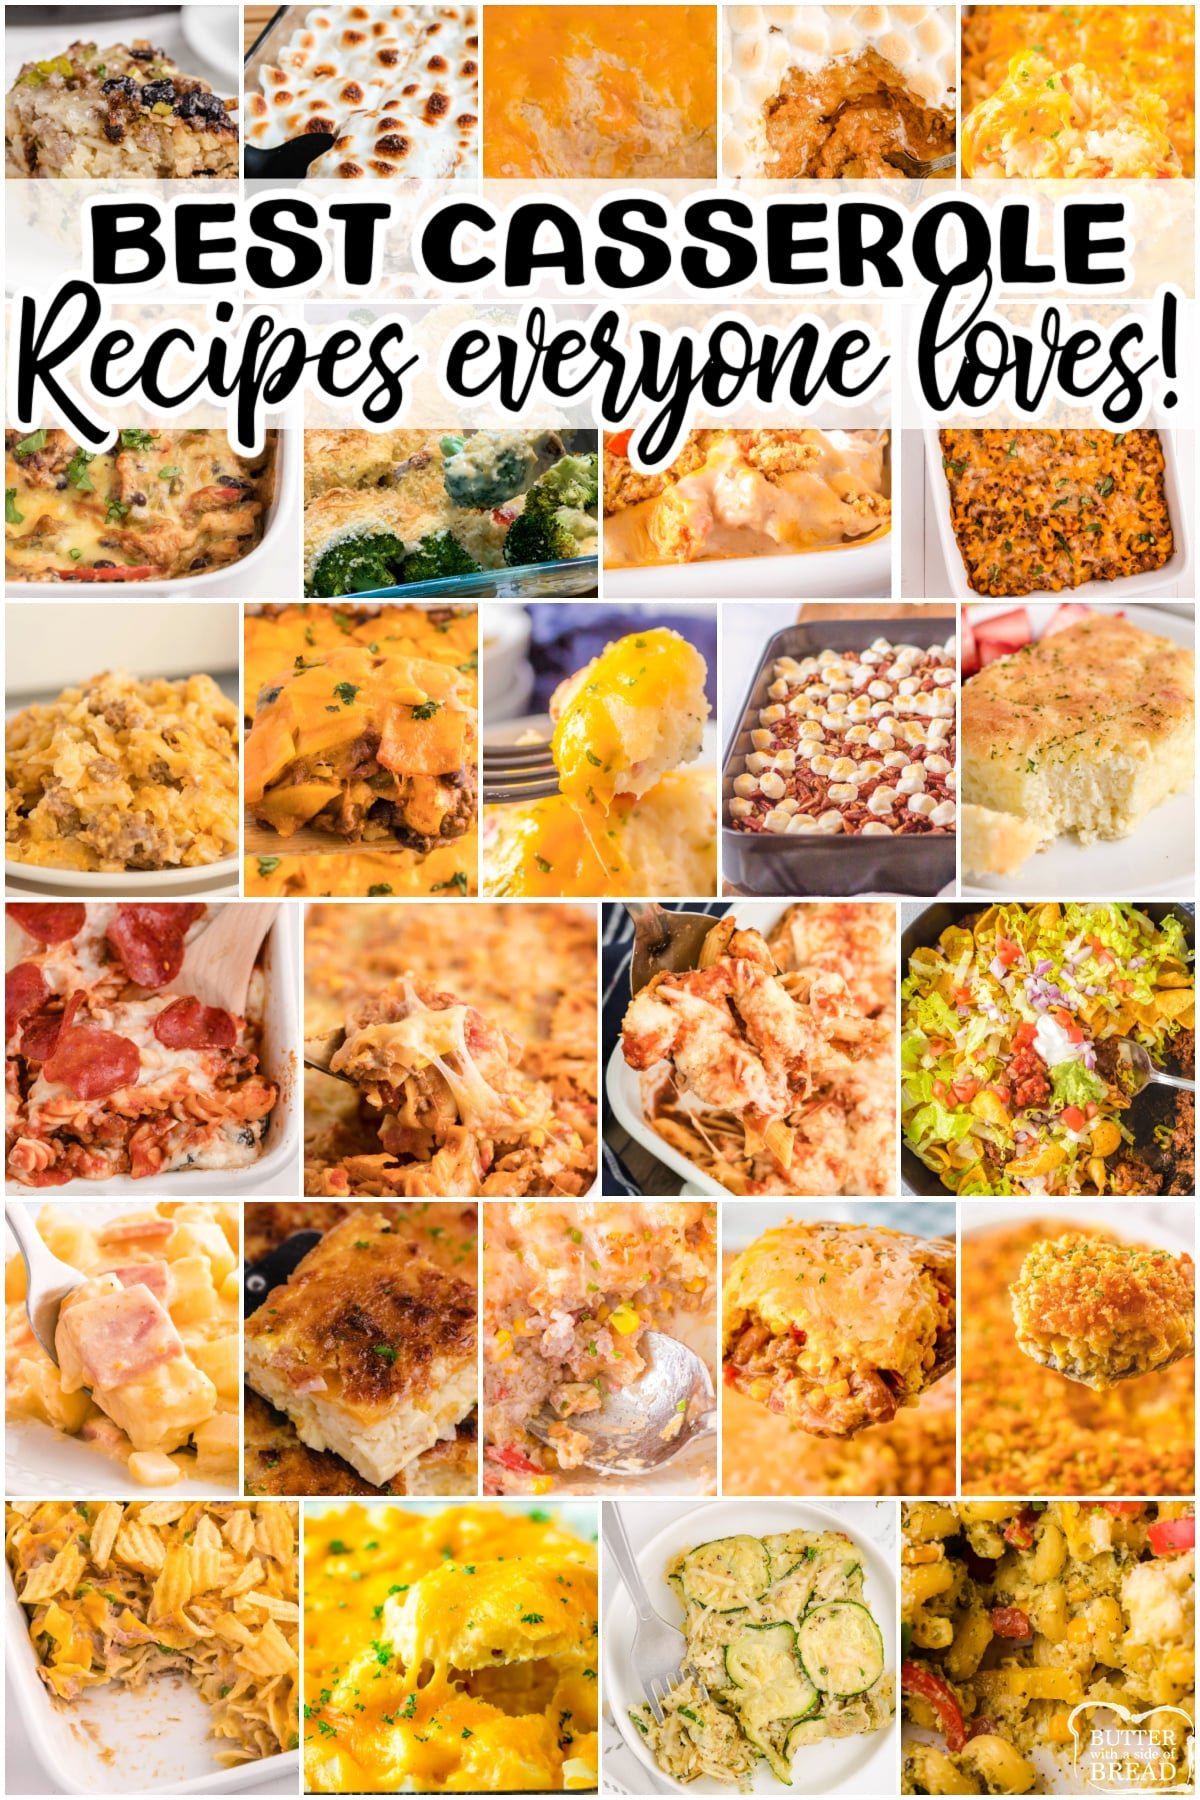 Casserole Recipes are perfect for weeknight dinners, potlucks or parties. Here is a collection of our very best casserole recipes - all of them are hearty, easy to make, and absolutely delicious! 